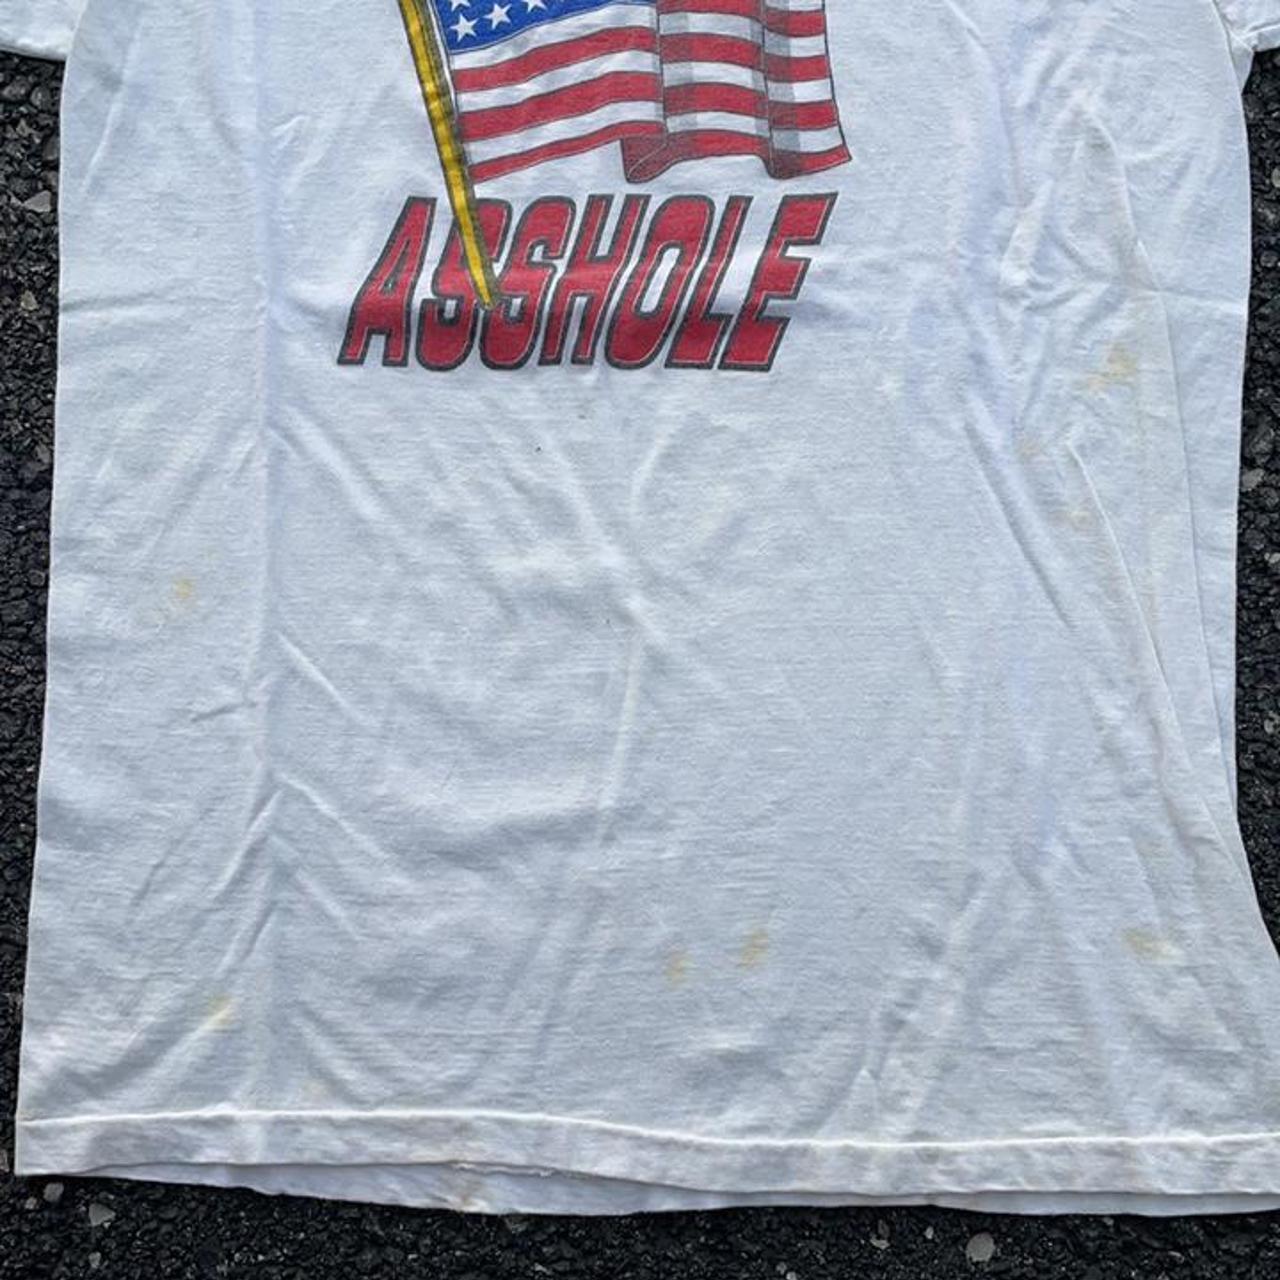 Product Image 3 - Vintage American flag try burning